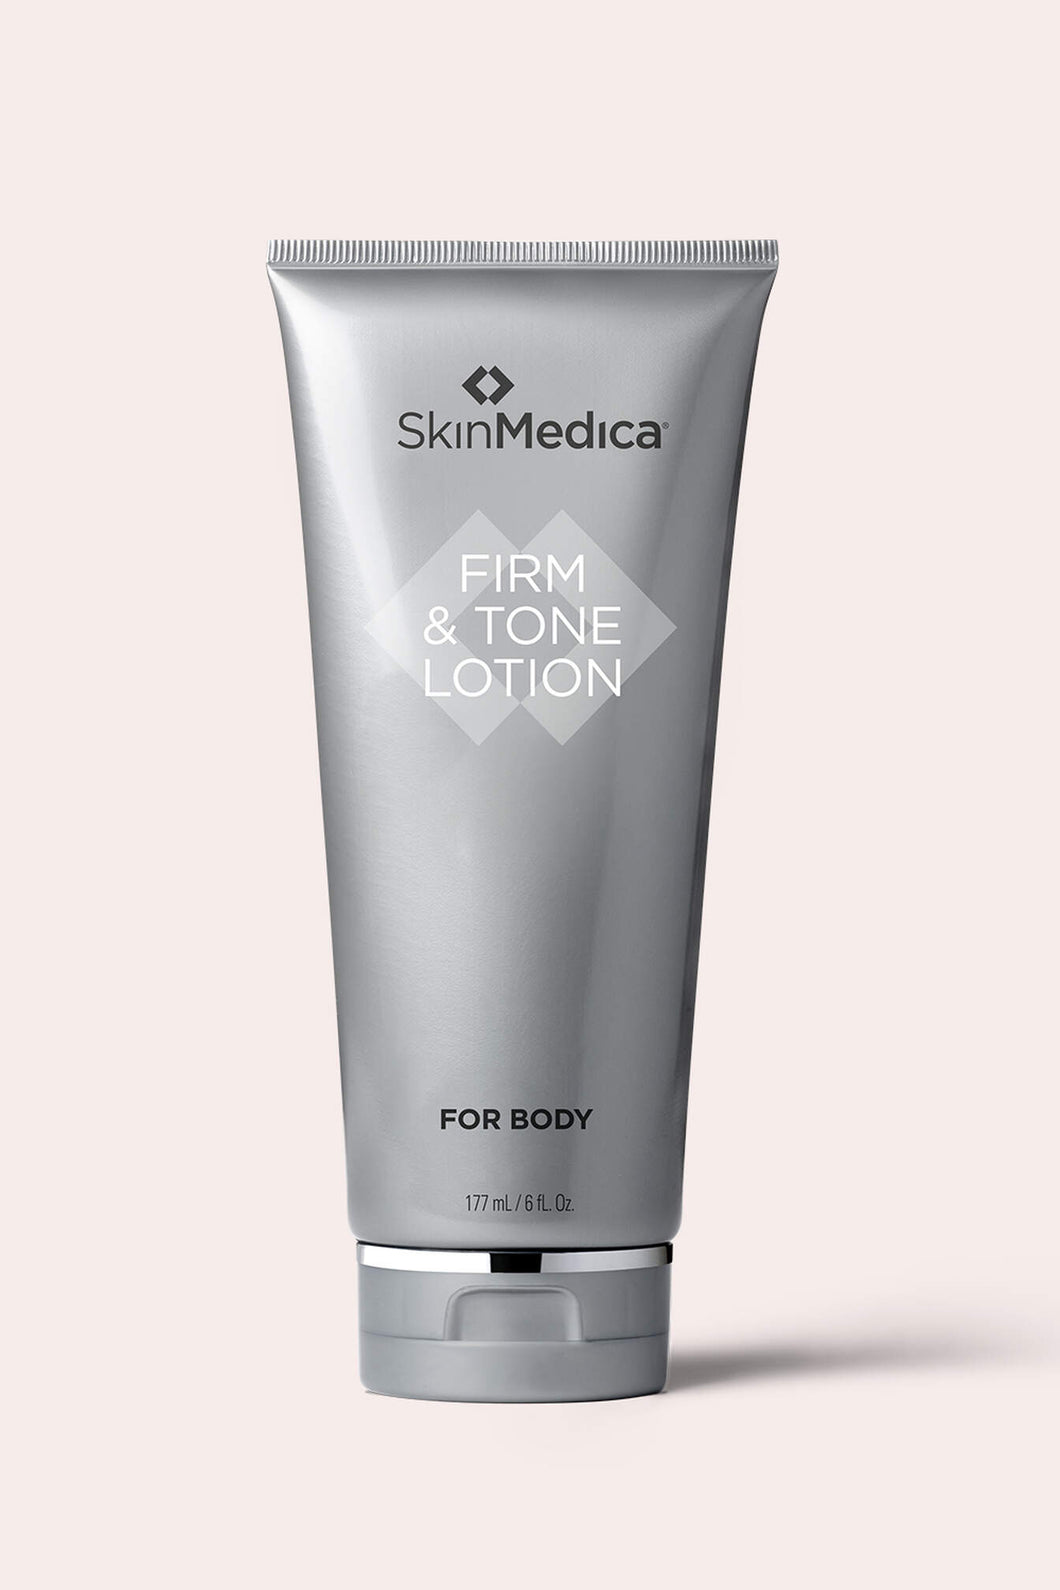 Skin Medica Firm and Tone Lotion